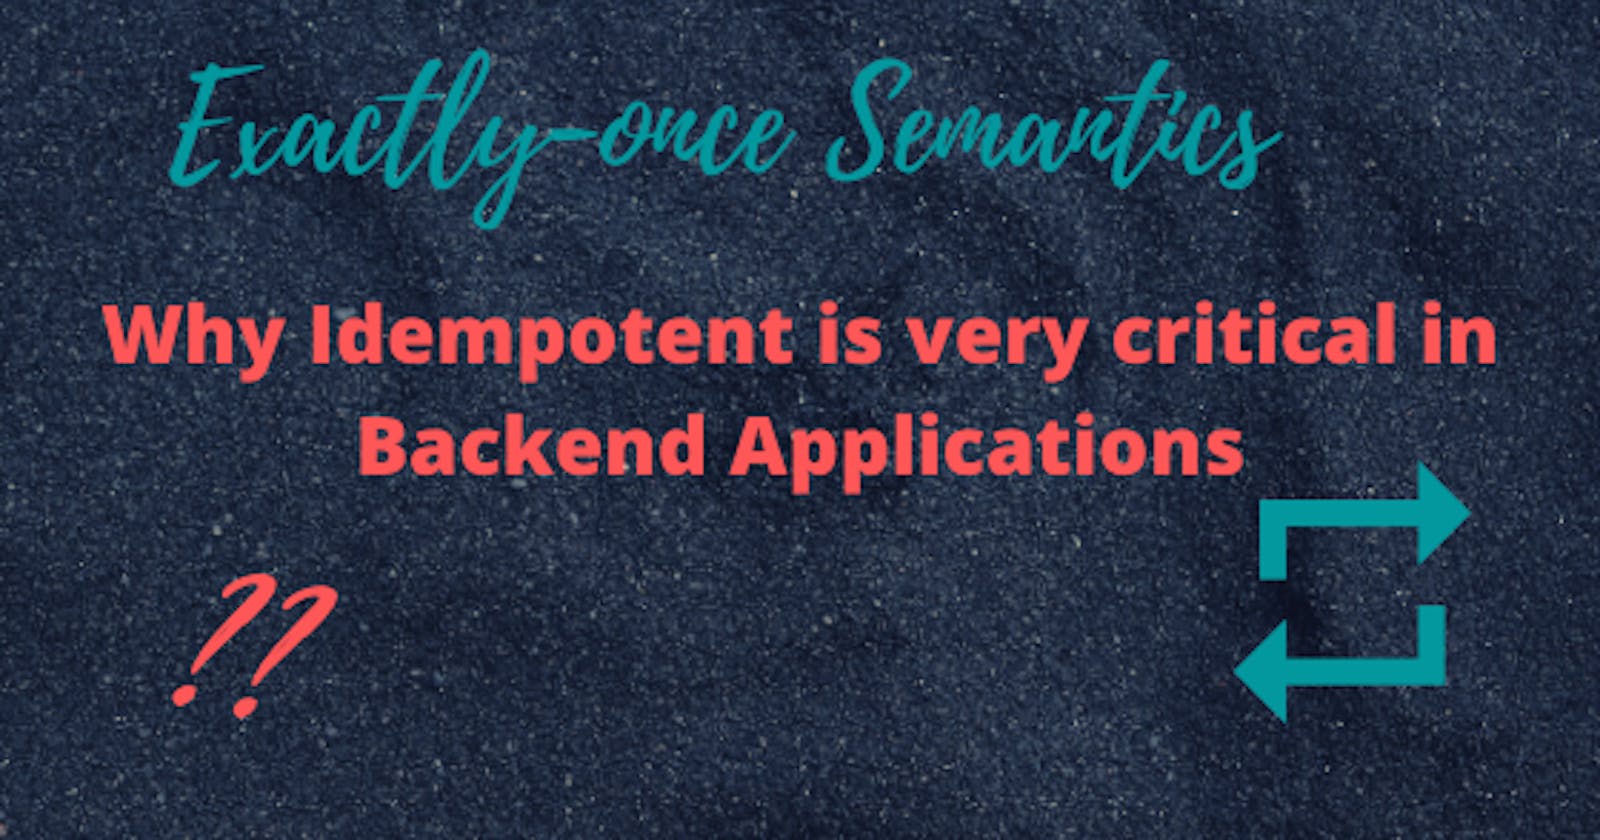 Why Idempotent is very critical in Backend Applications